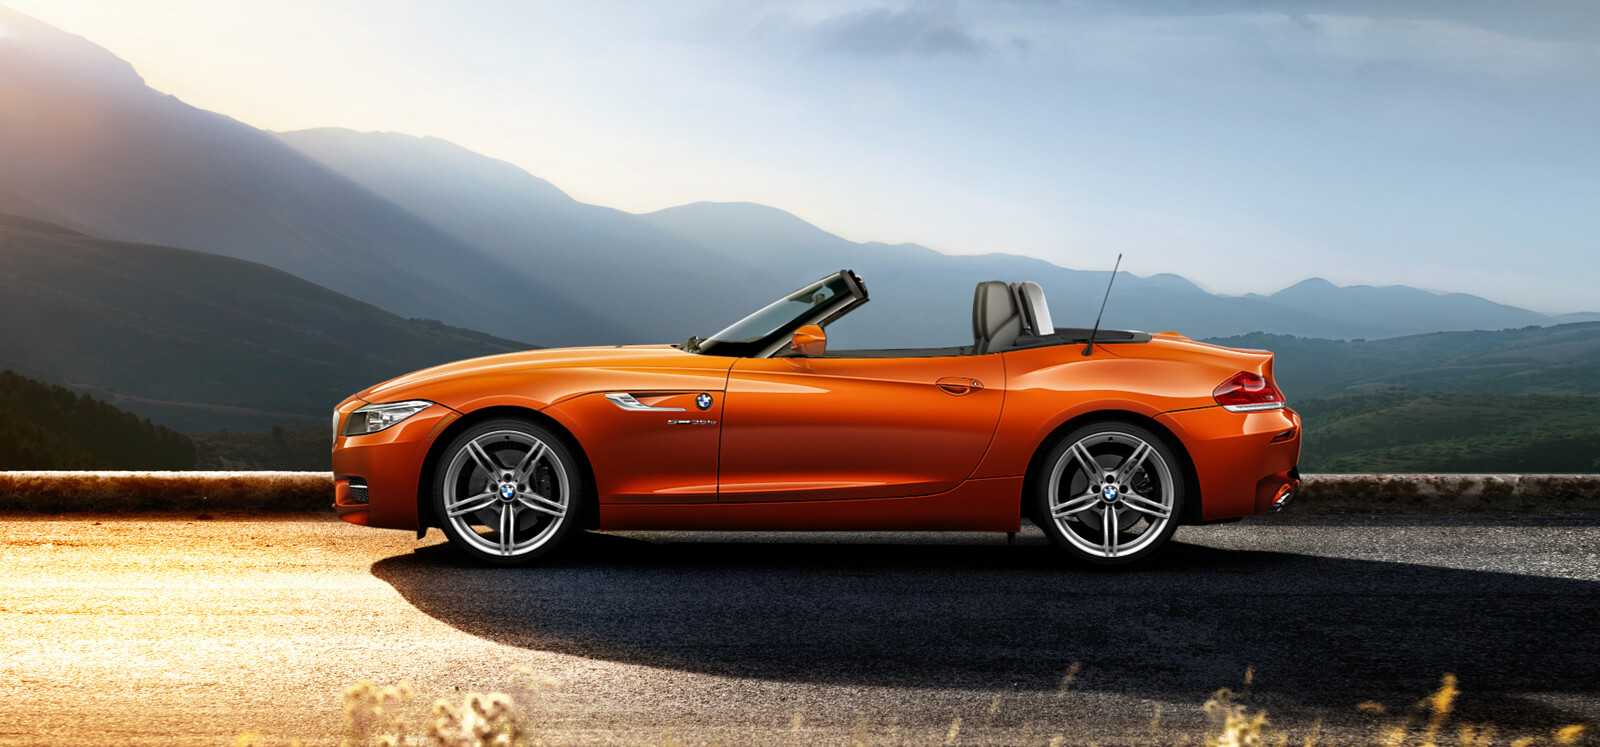 Amazing BMW Z4 Pictures & Backgrounds